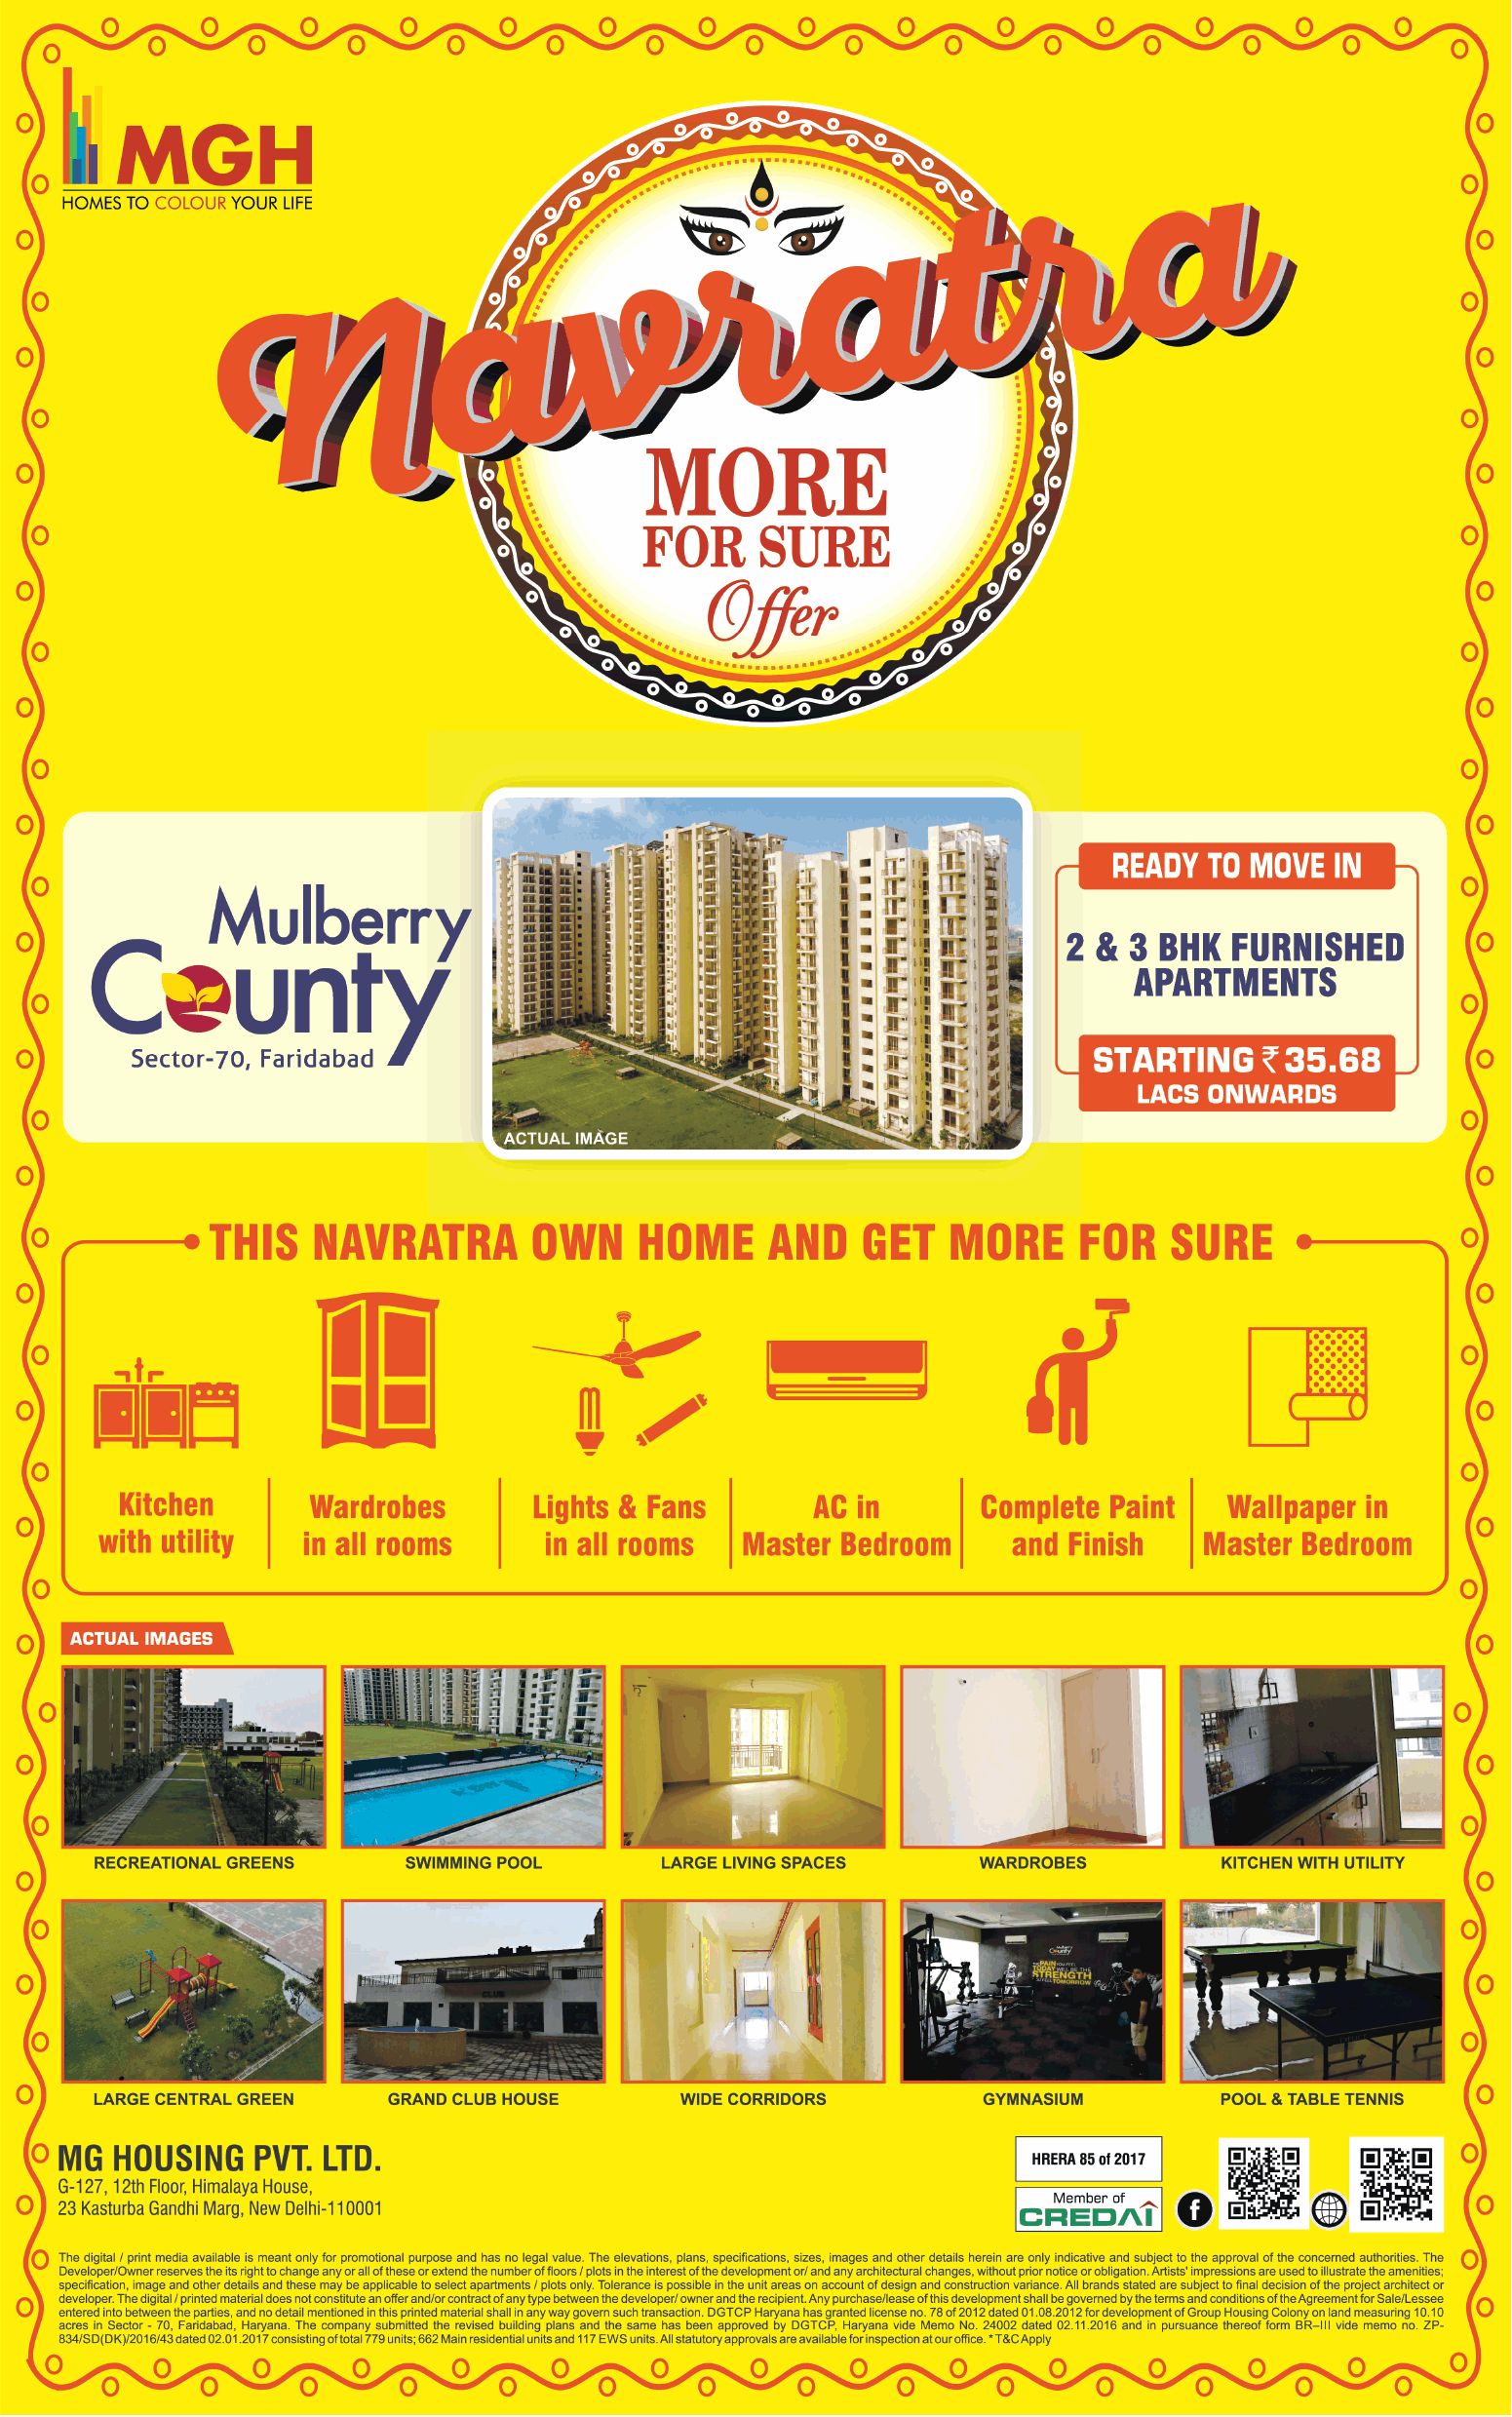 Book 2 & 3 BHK furnished apartments Rs 35.68 Lac at MGH Mulberry County in Faridabad